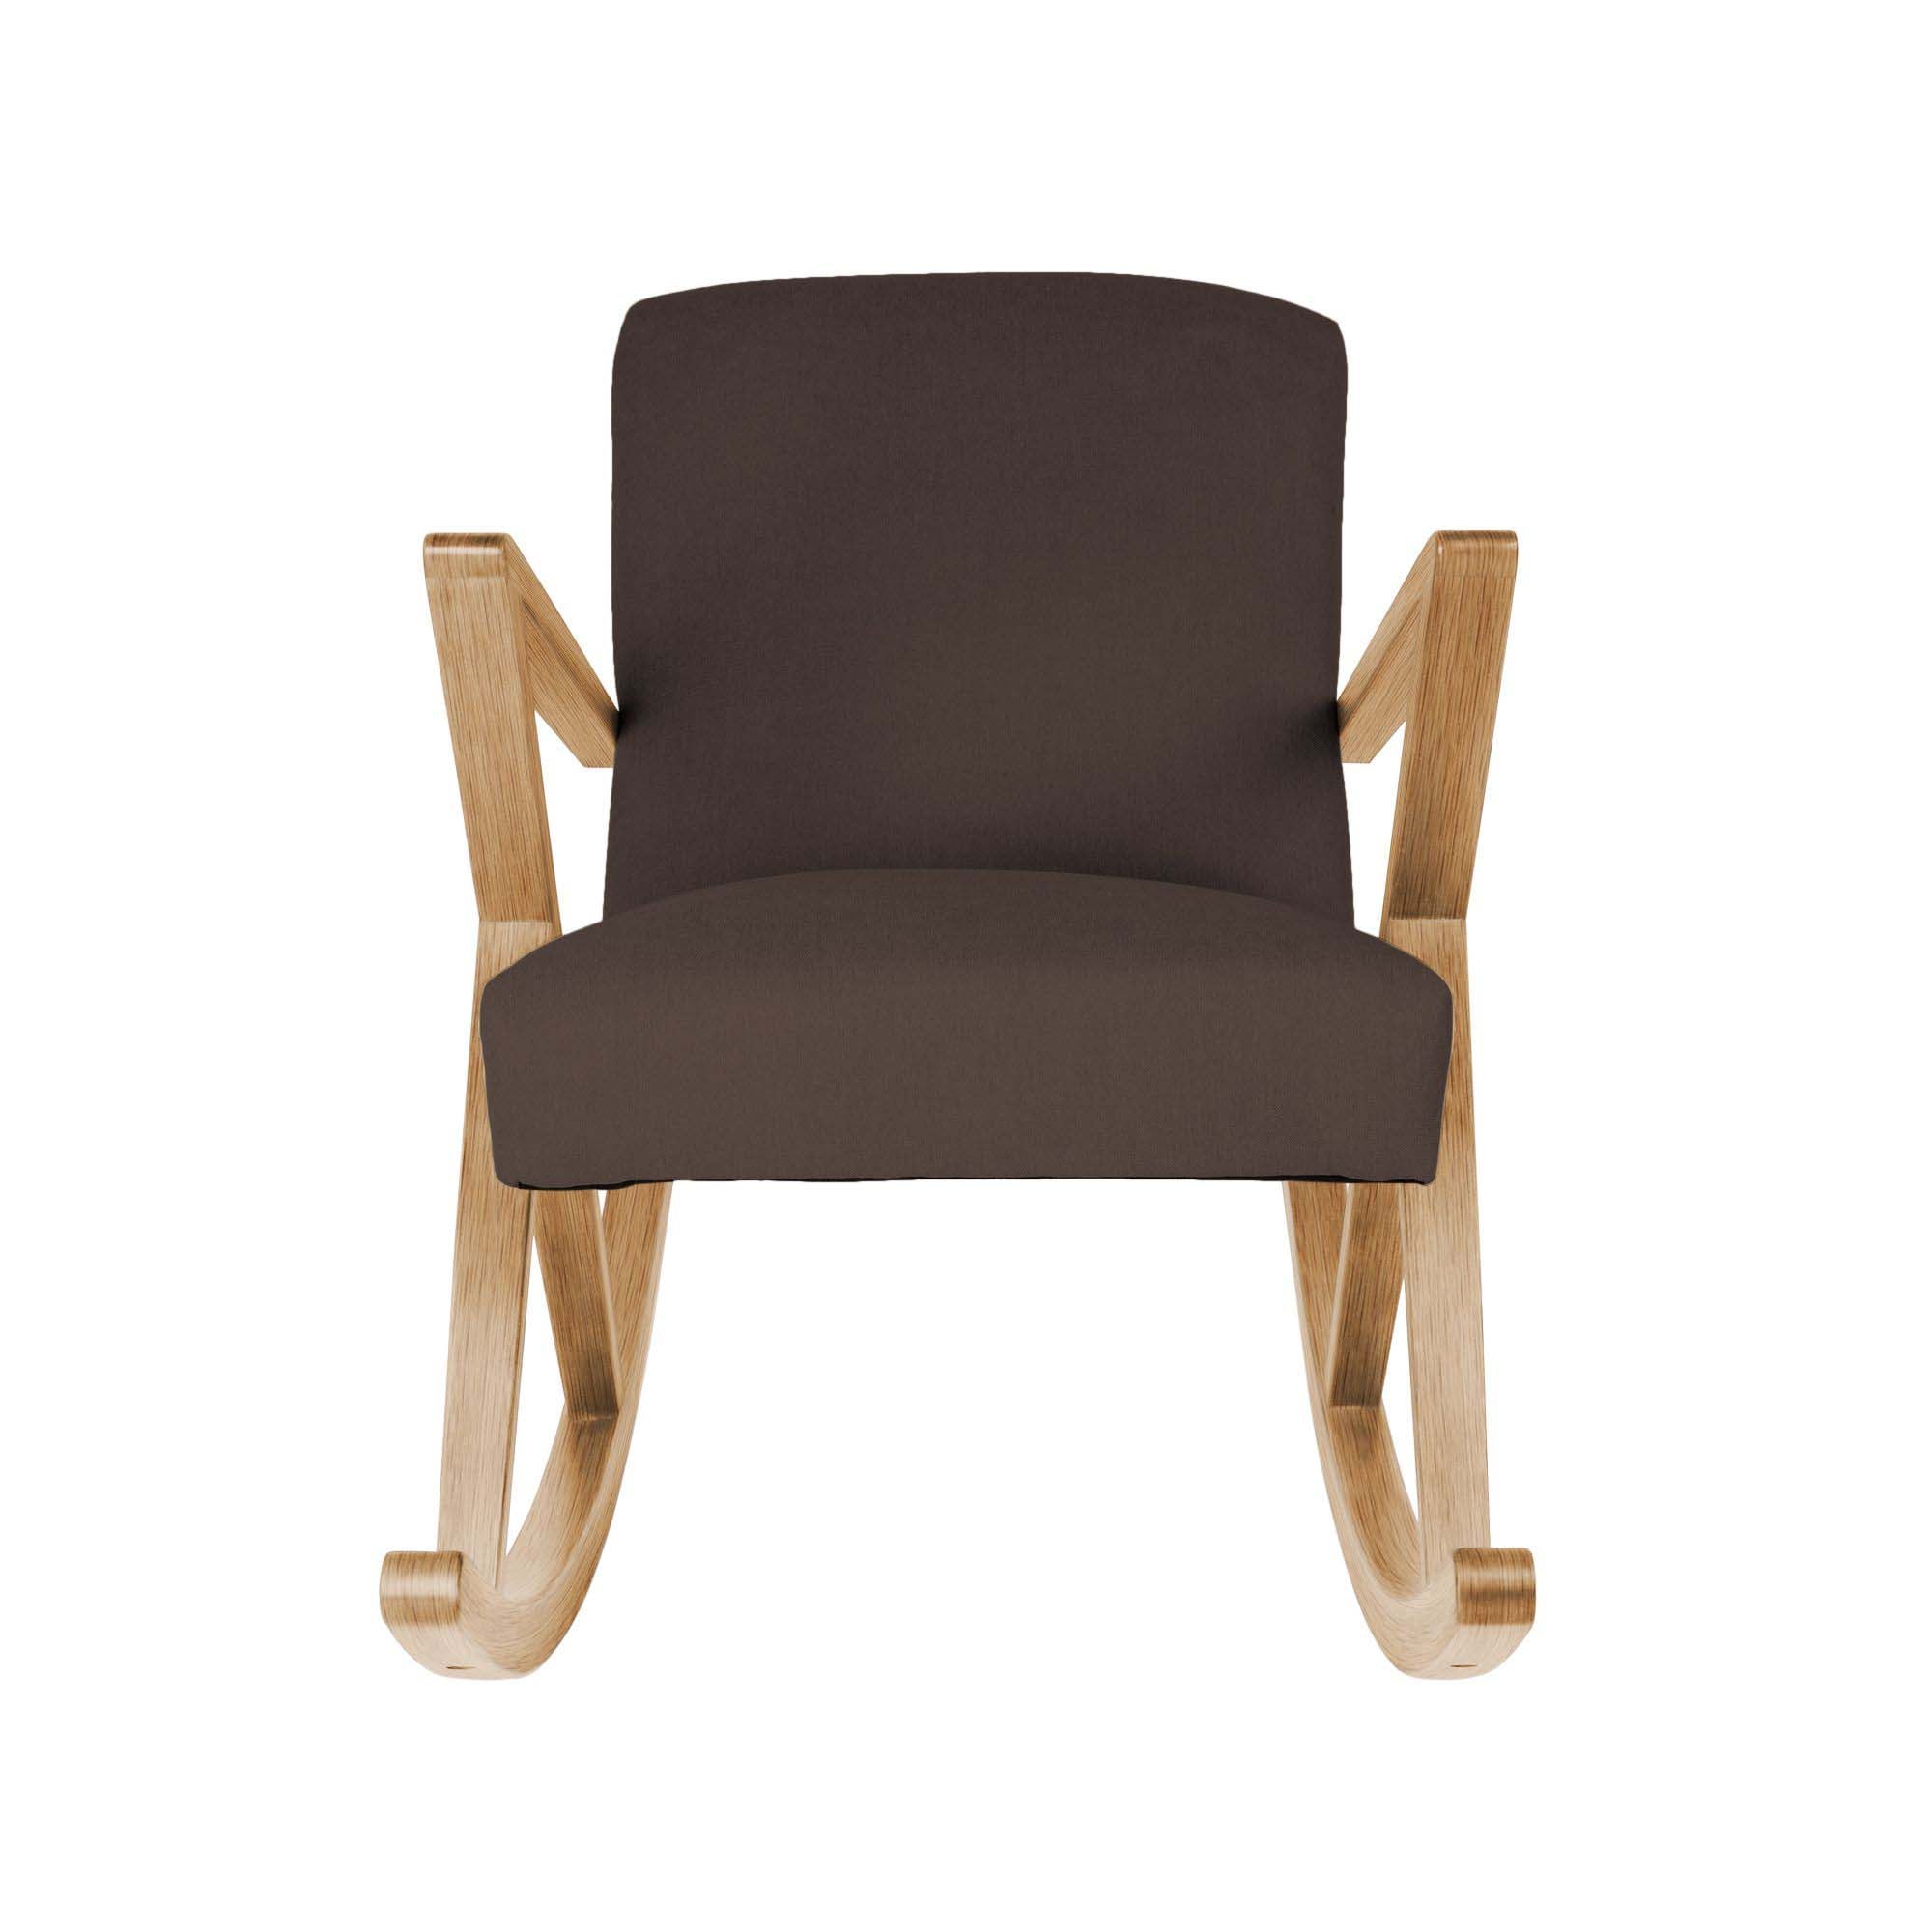 Rocking Chair, Oak Wood Frame, Natural Colour brown fabric, front view